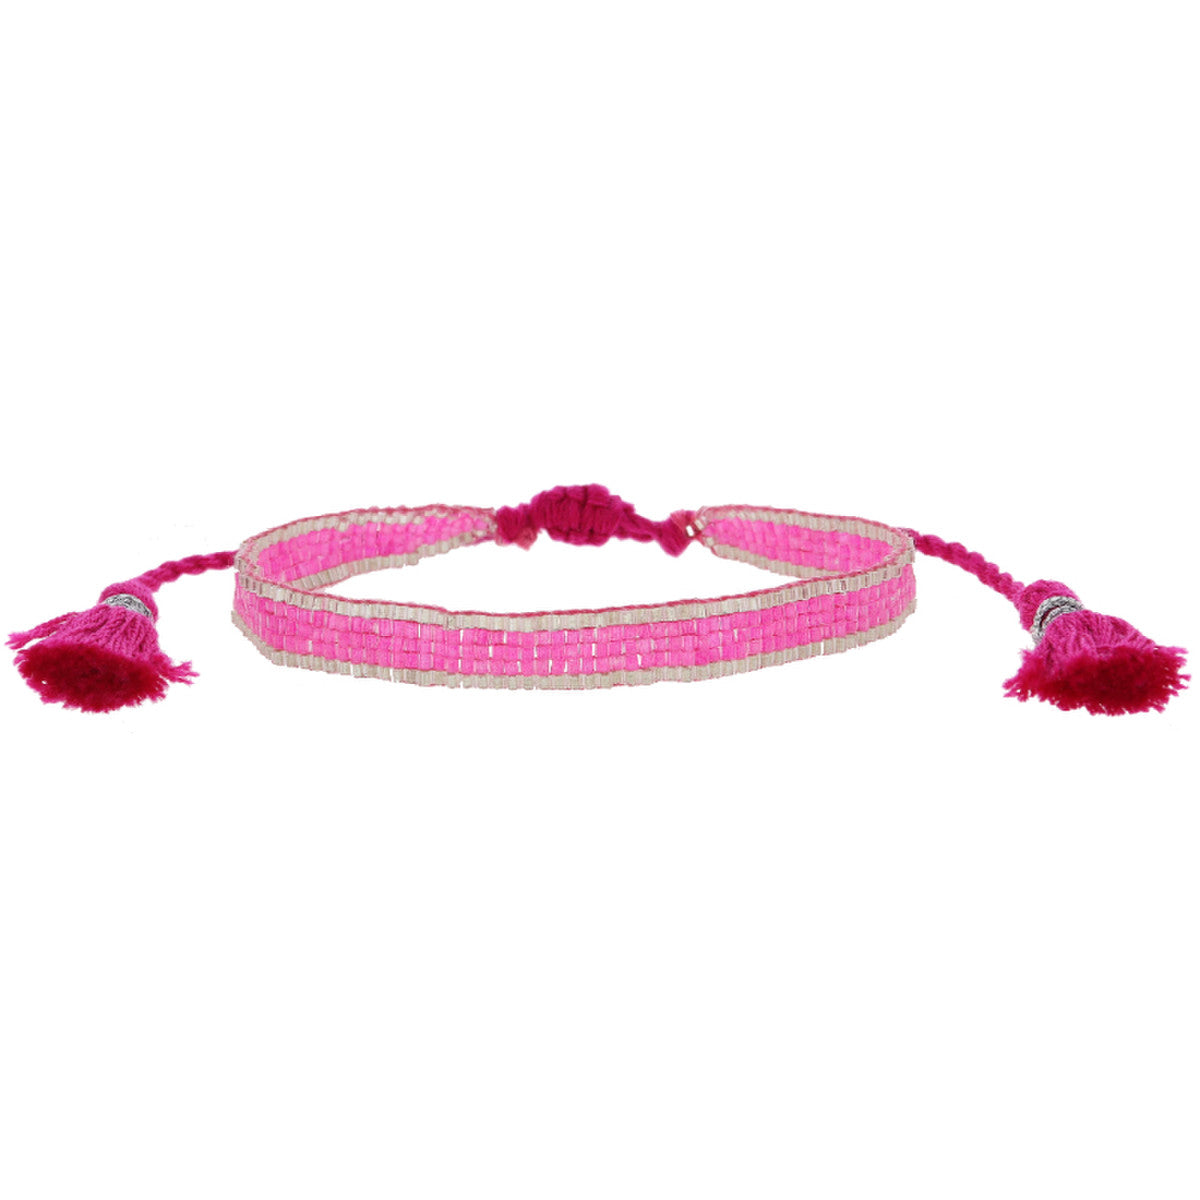 Thin Hot Pink with Gold Edge Woven Beaded Band Bracelet